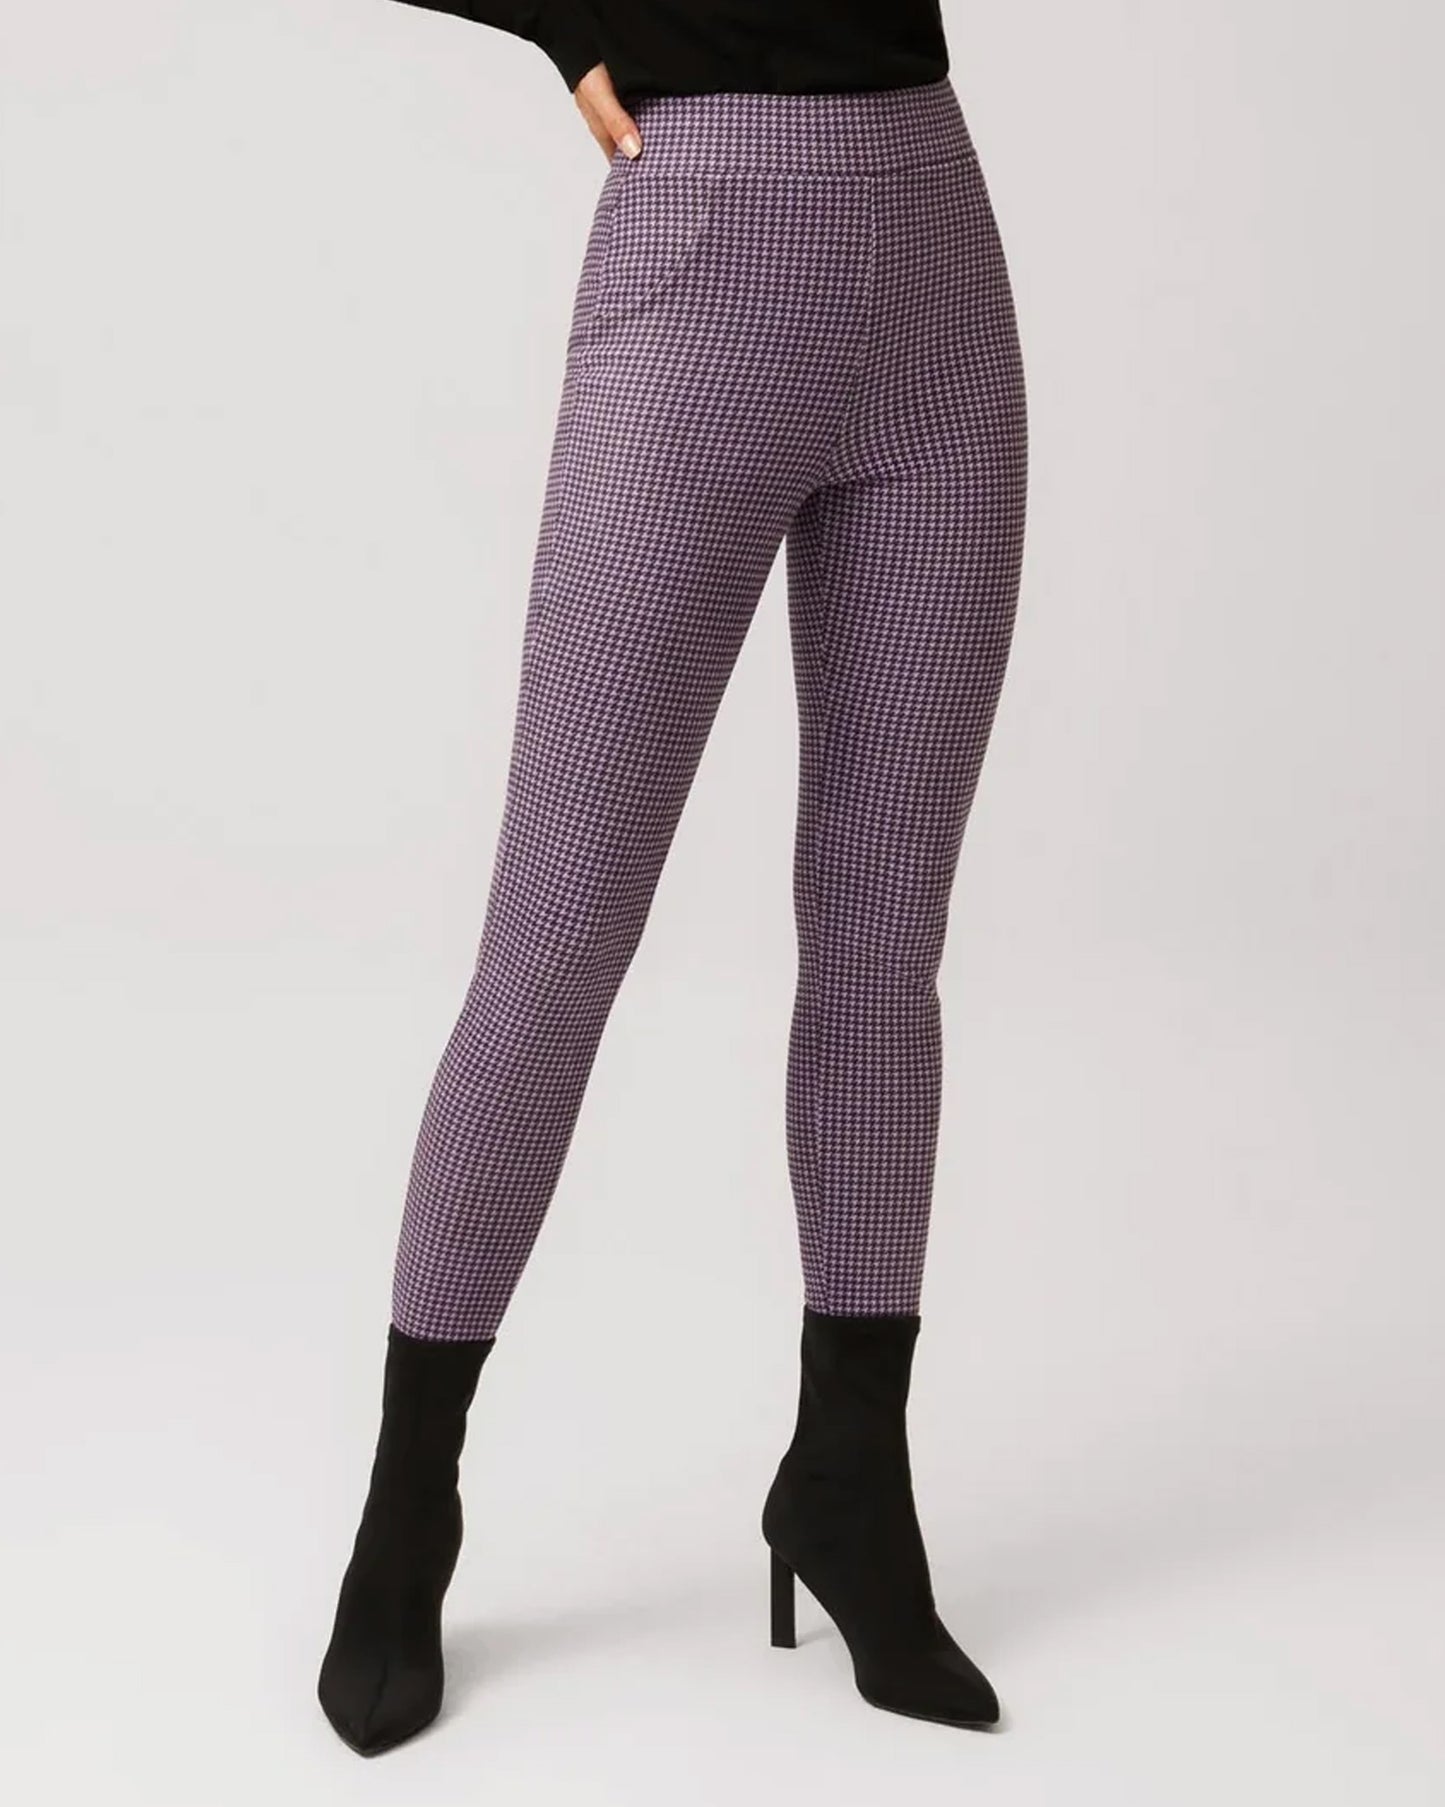 Ysabel Mora 70402 Houndstooth Leggings - High waisted purple trouser leggings (treggings) with a black micro houndstooth style pattern and faux front pockets.